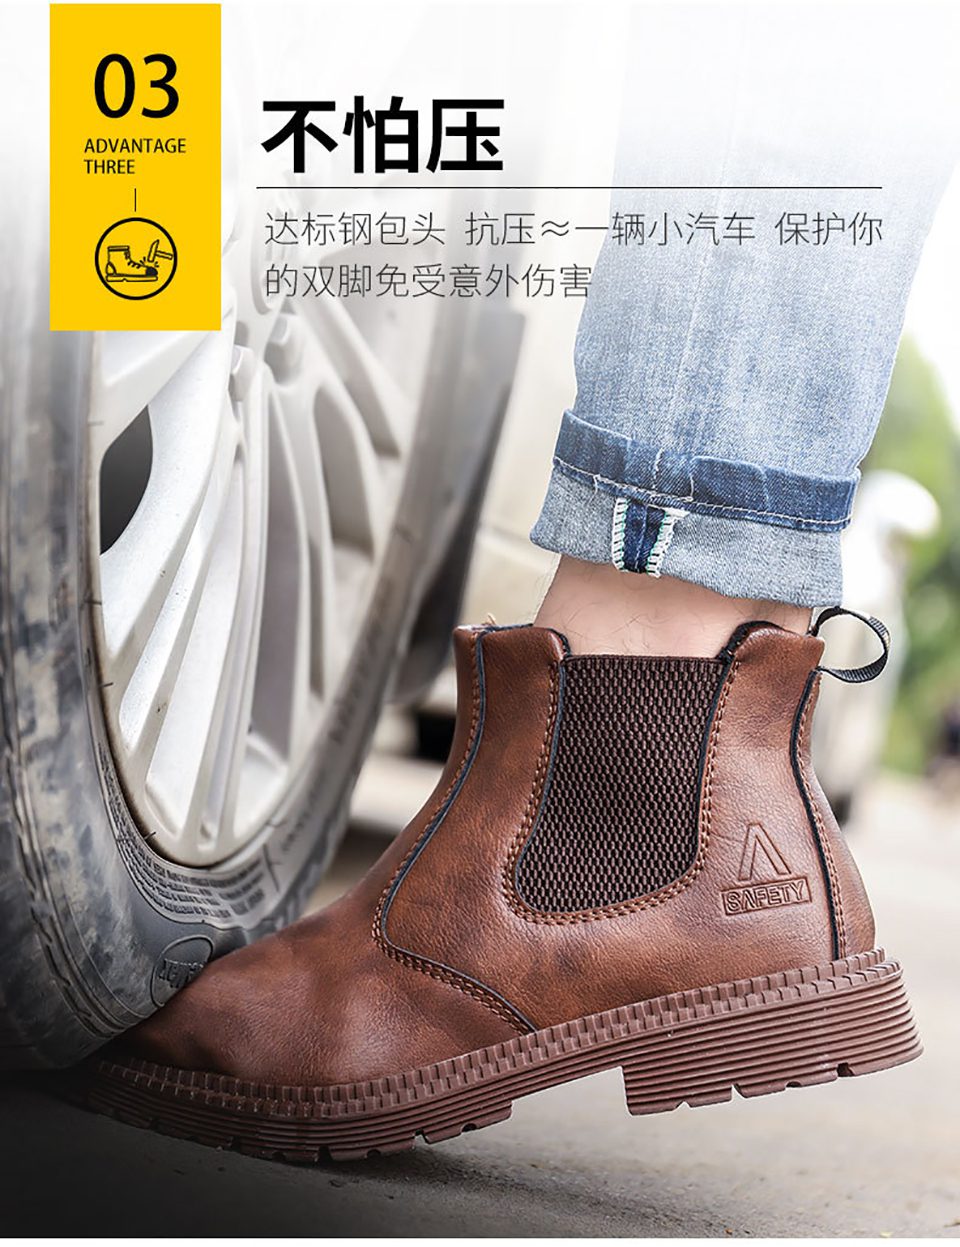 GRITION Unisex Work Shoes Steel Toe Waterproof Safety Shoes Anti-smash Anti-puncture Non Slip Durable Lightweight Chelsea Boots